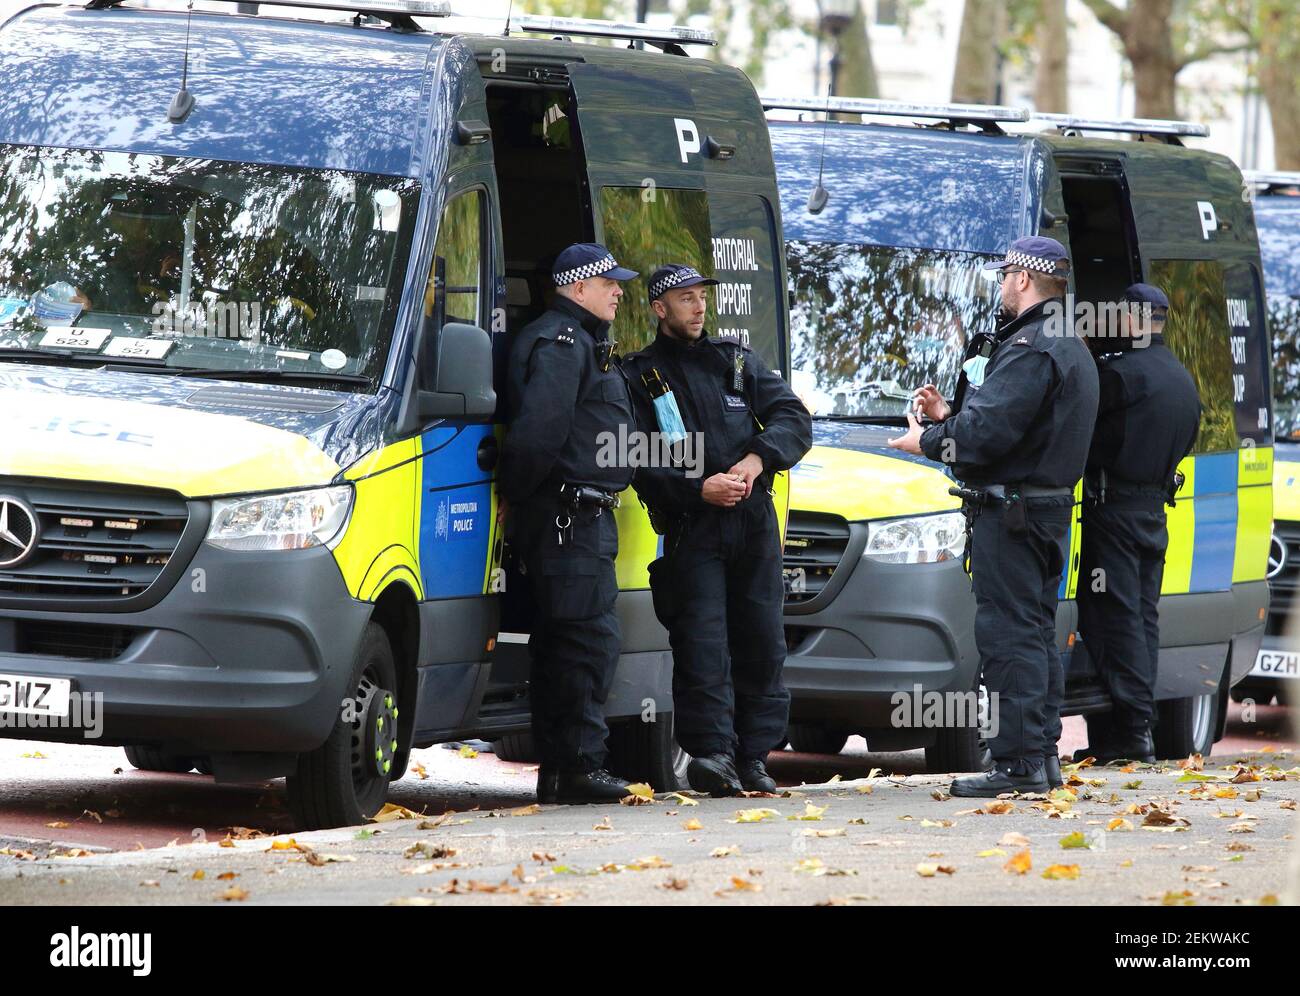 Policemen wait outside their Territorial Support Unit vans as they await a  call to action. With a number of expected demonstrations taking place in  the capital this weekend, the Metropolitan Police mobilized